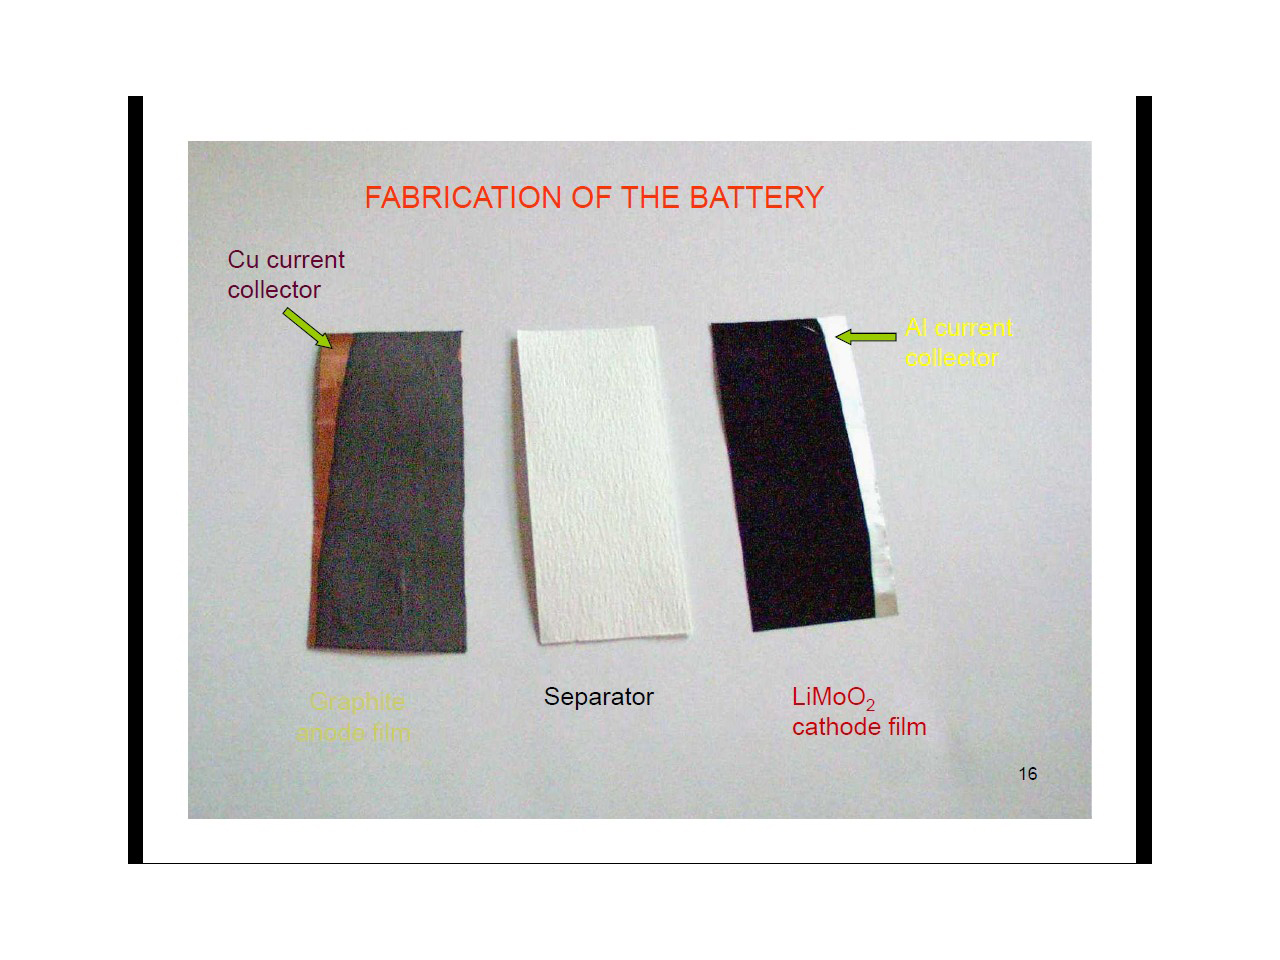 FABRICATION OF THE BATTERY